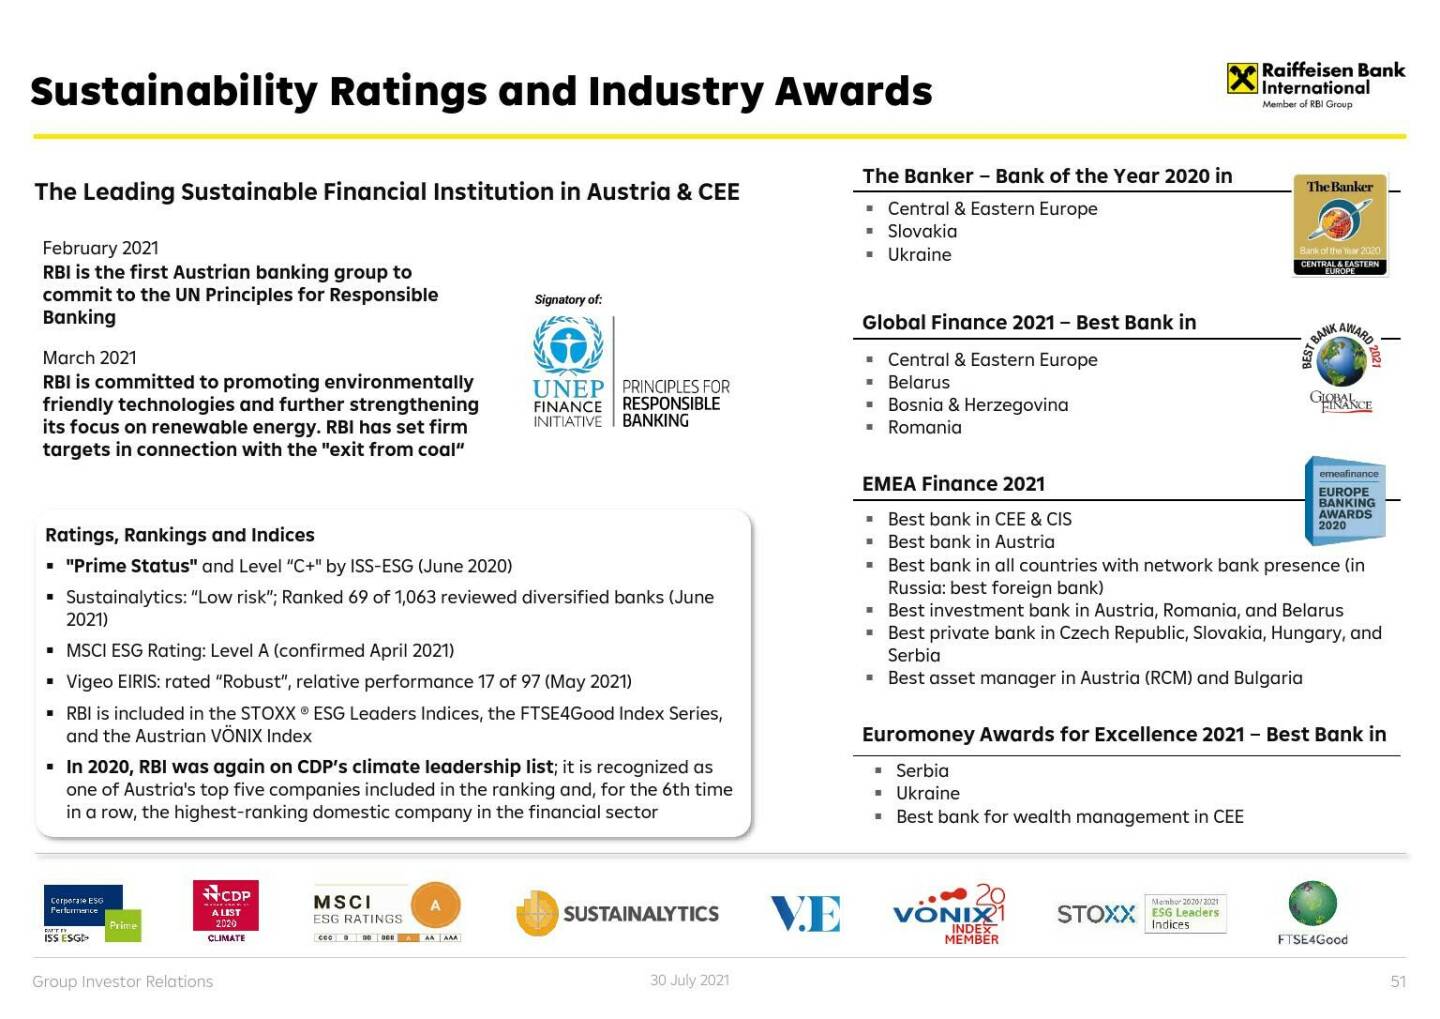 RBI - Sustainability ratings and industry awards